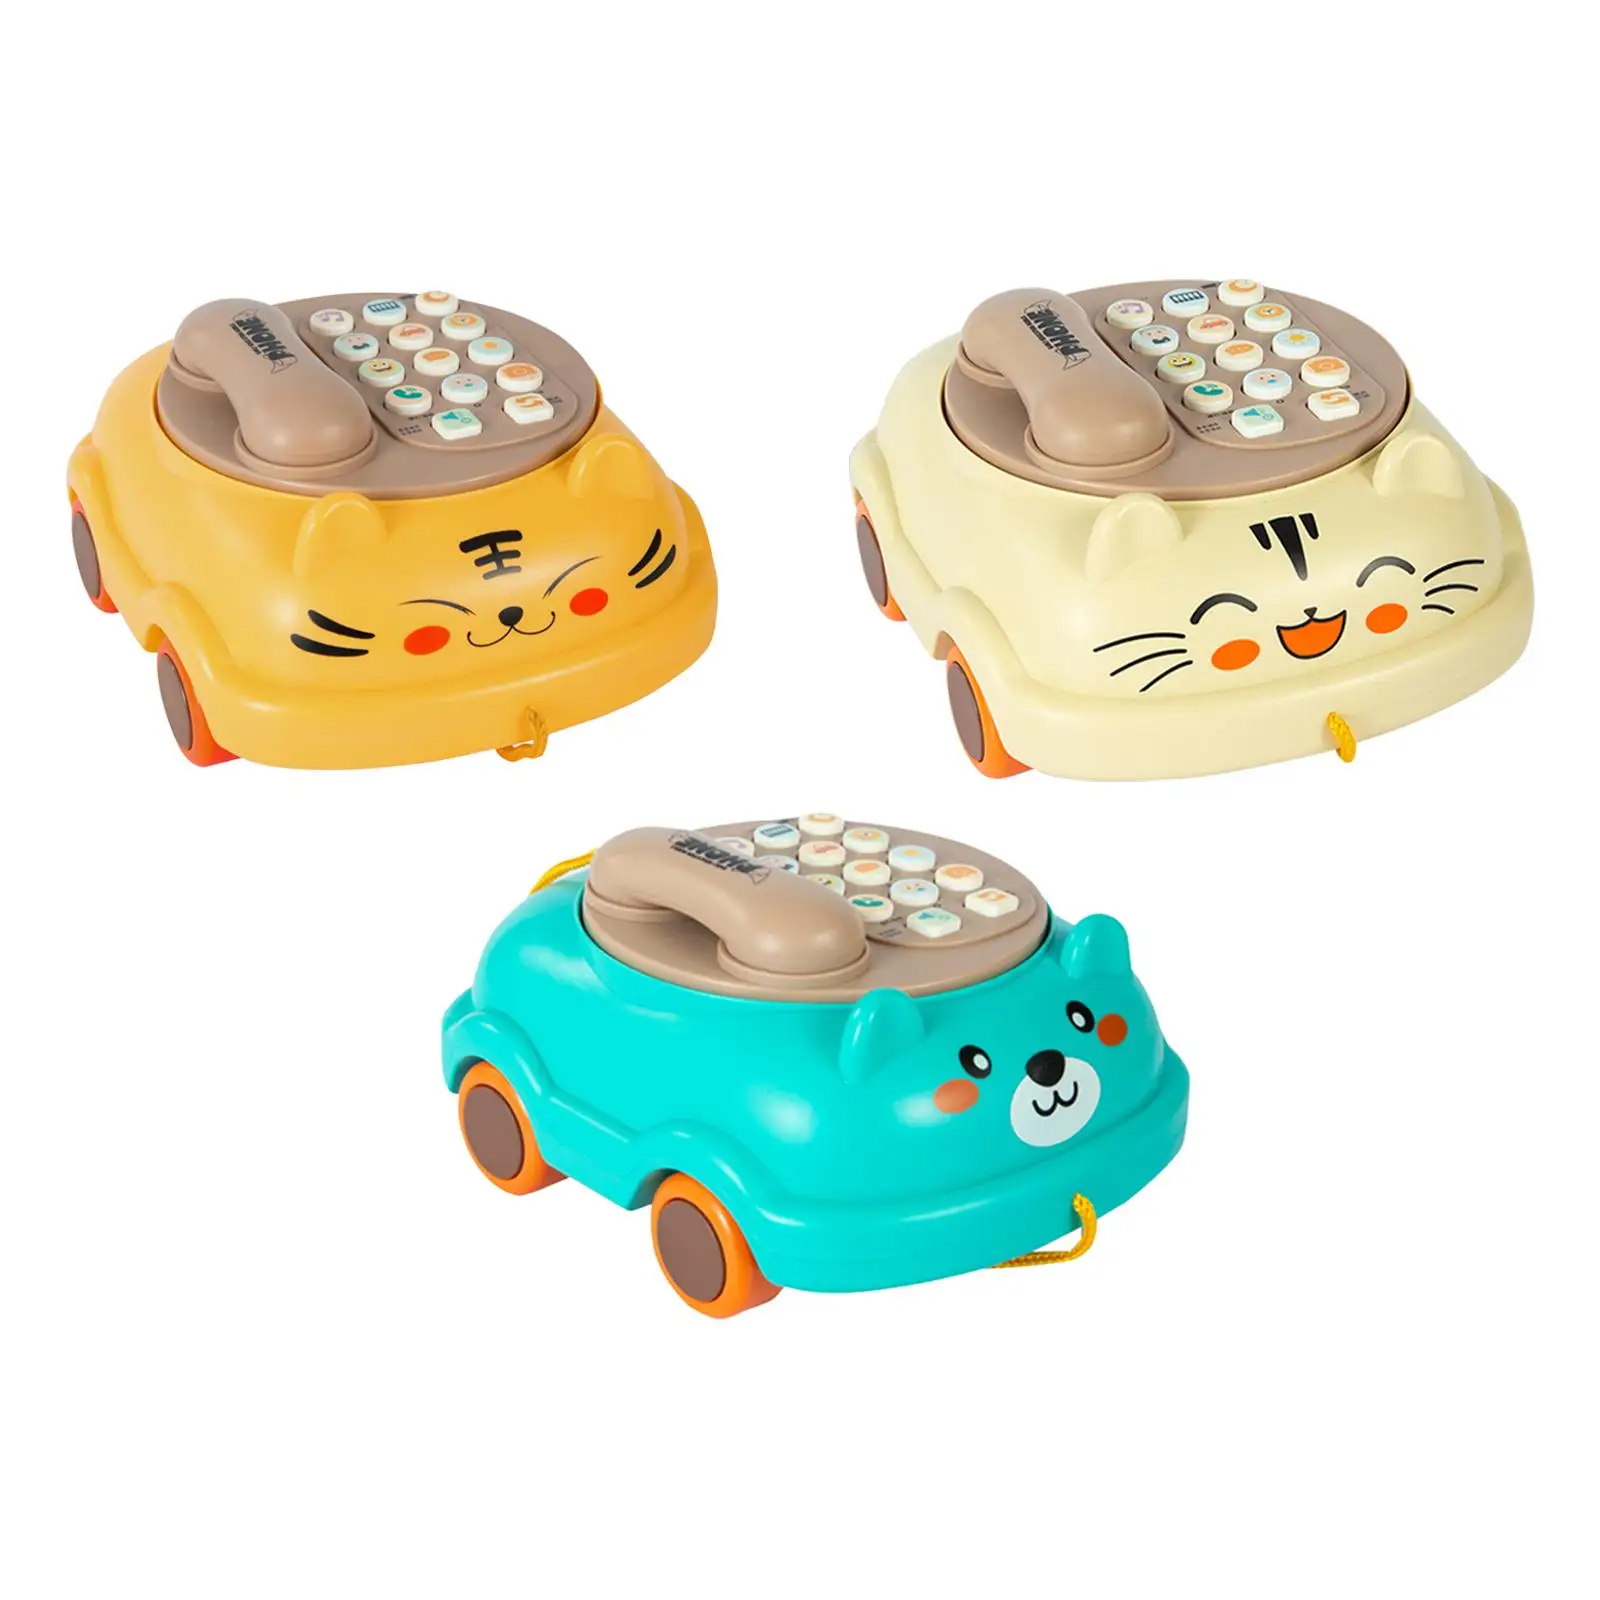 Kid Phone Cognitive Development Games for 3 Years Old Creative Gift Boy